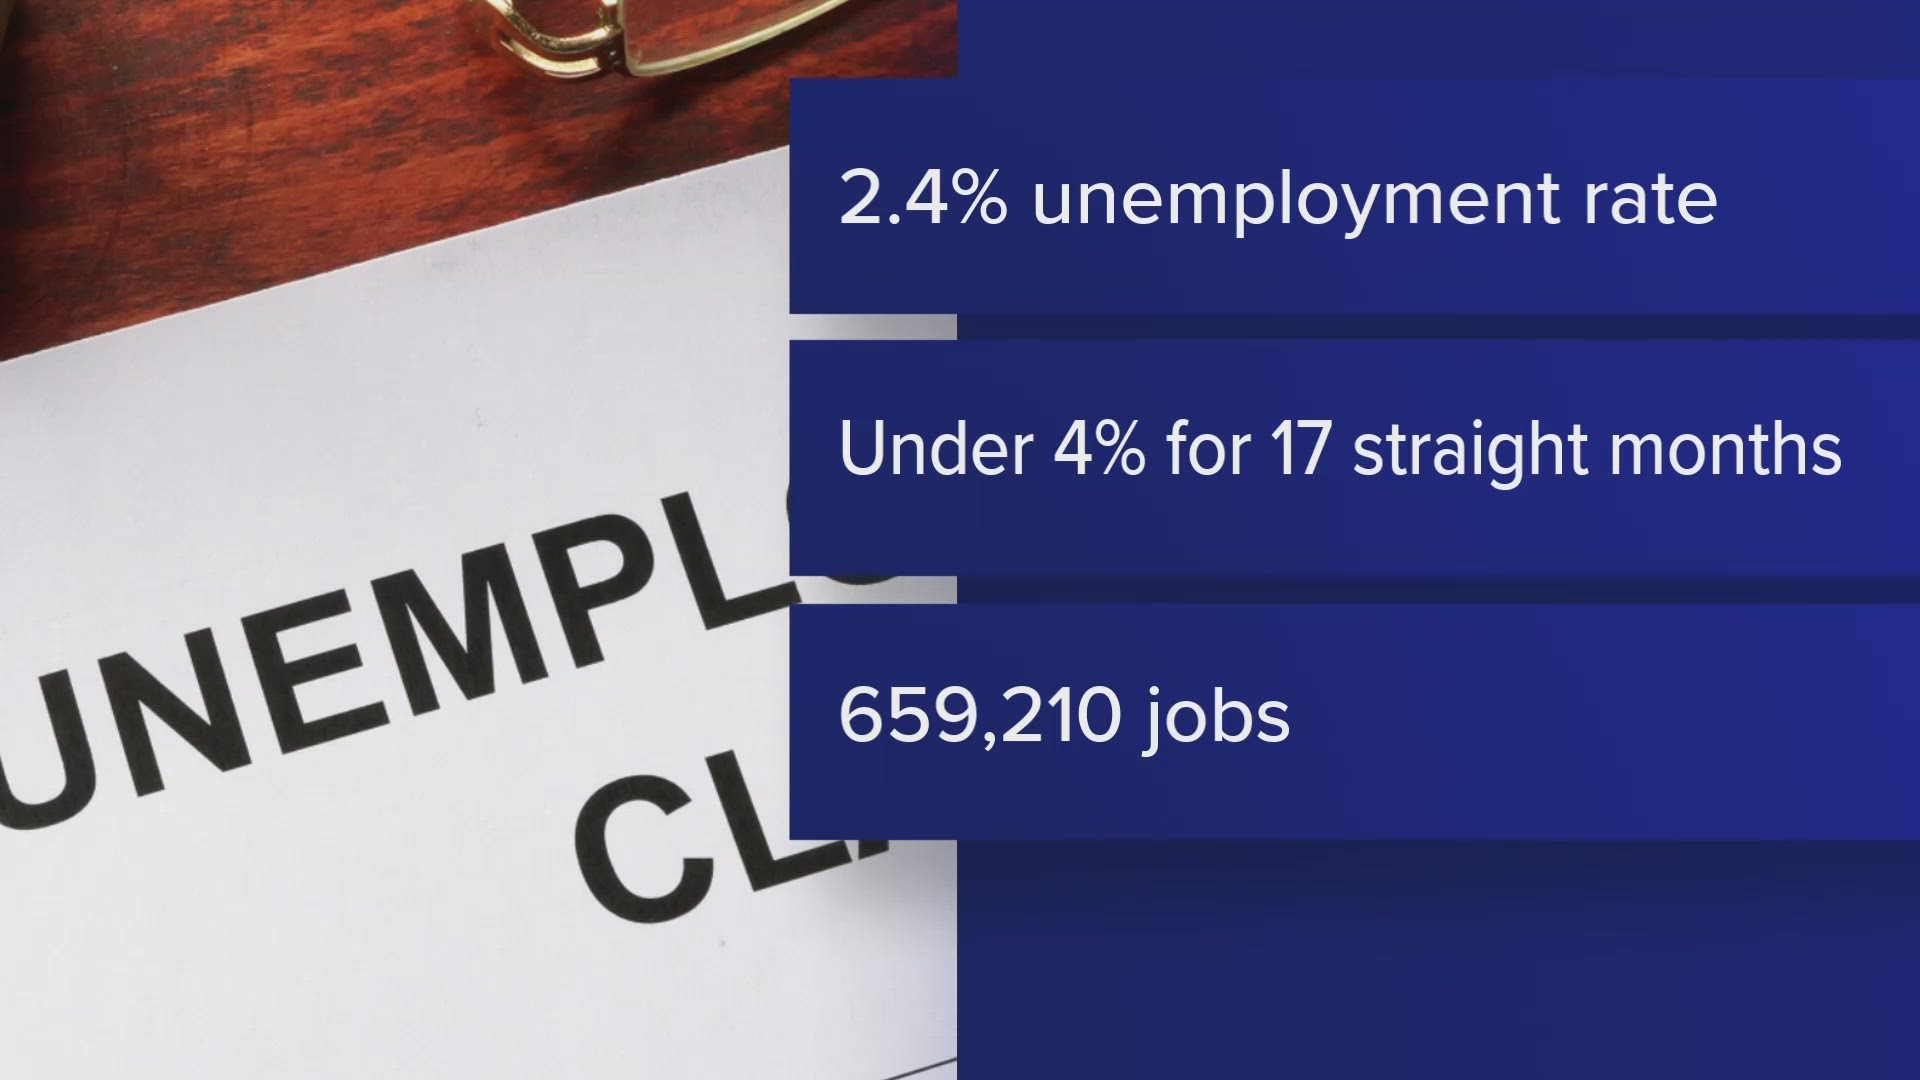 The Department of Labor said the unemployment rate is at 2.4 percent or April, which is the lowest it has been since they have been tracking the information.